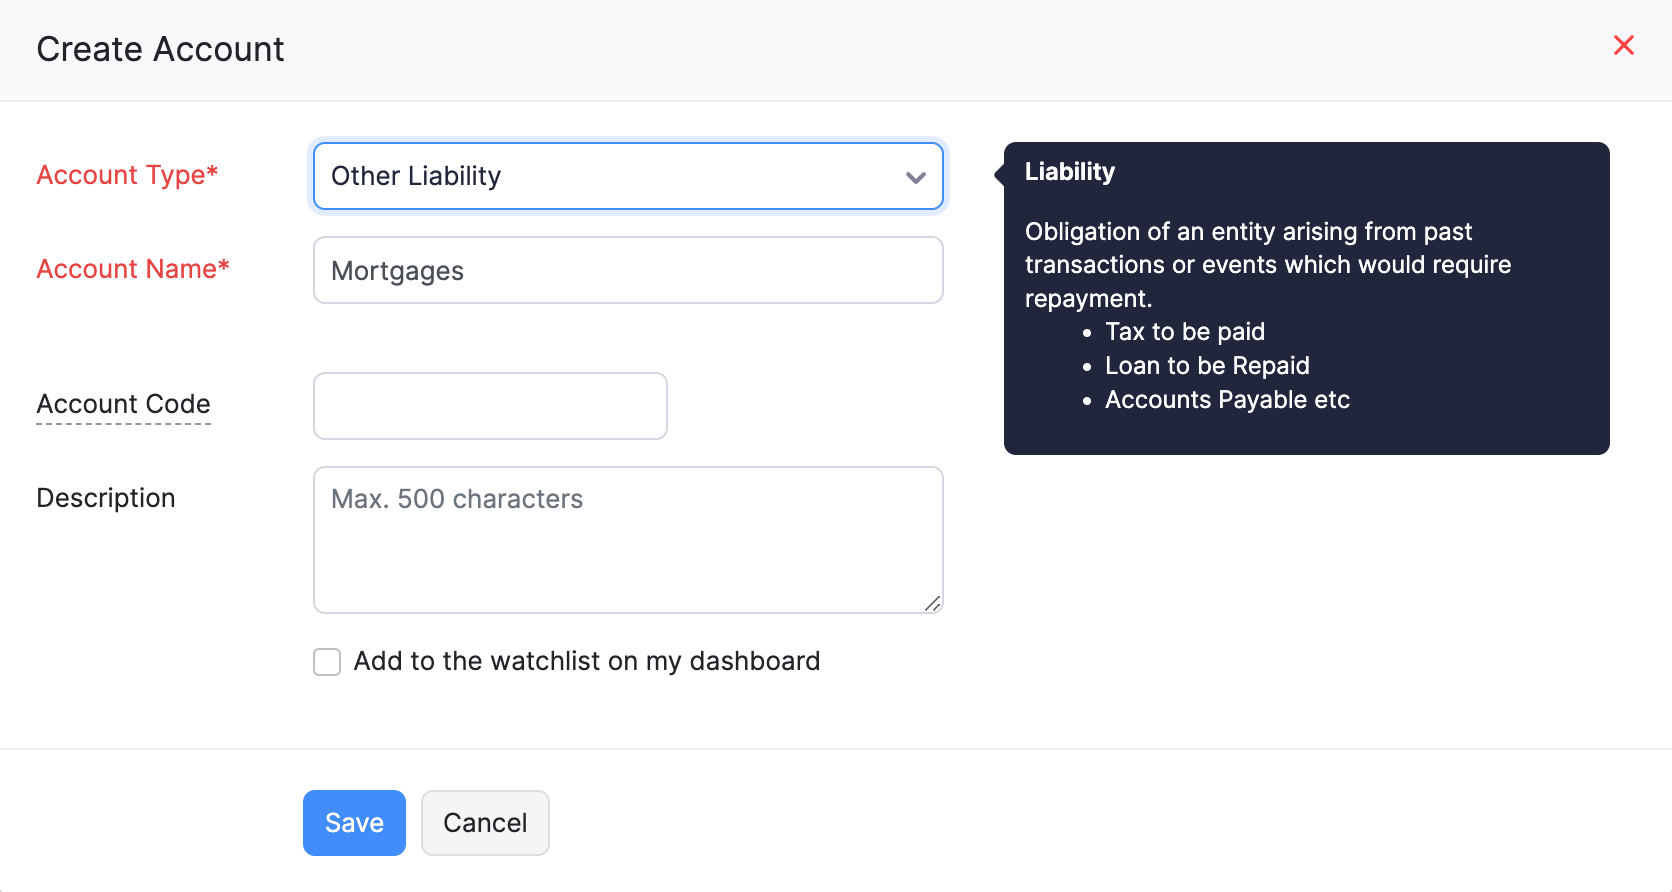 Select Other Liability as the account type